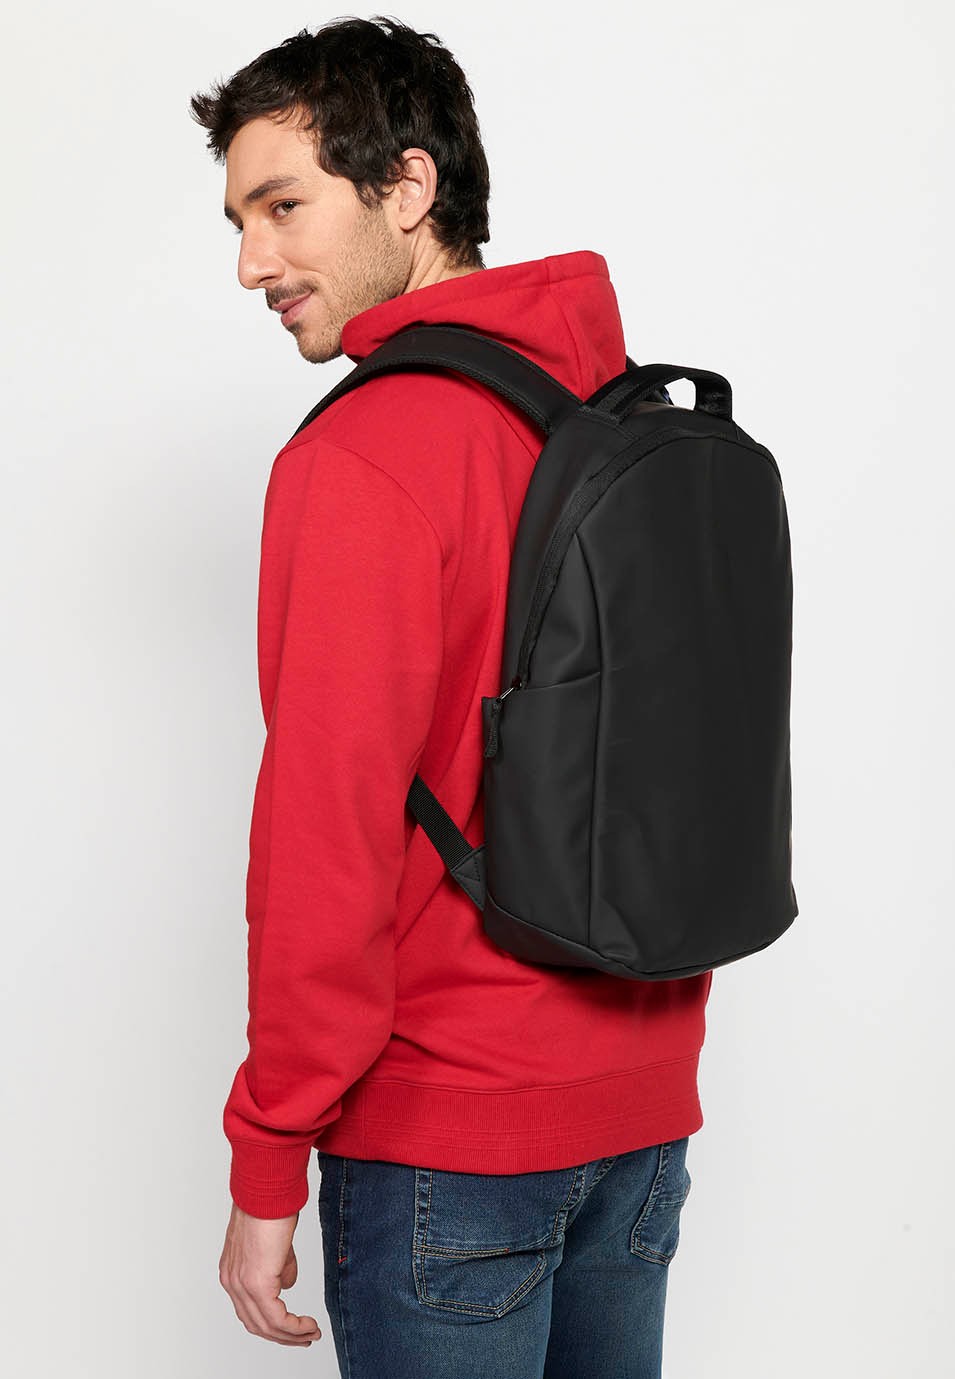 Koröshi Backpack with zipper closure and interior laptop pocket in Black 8